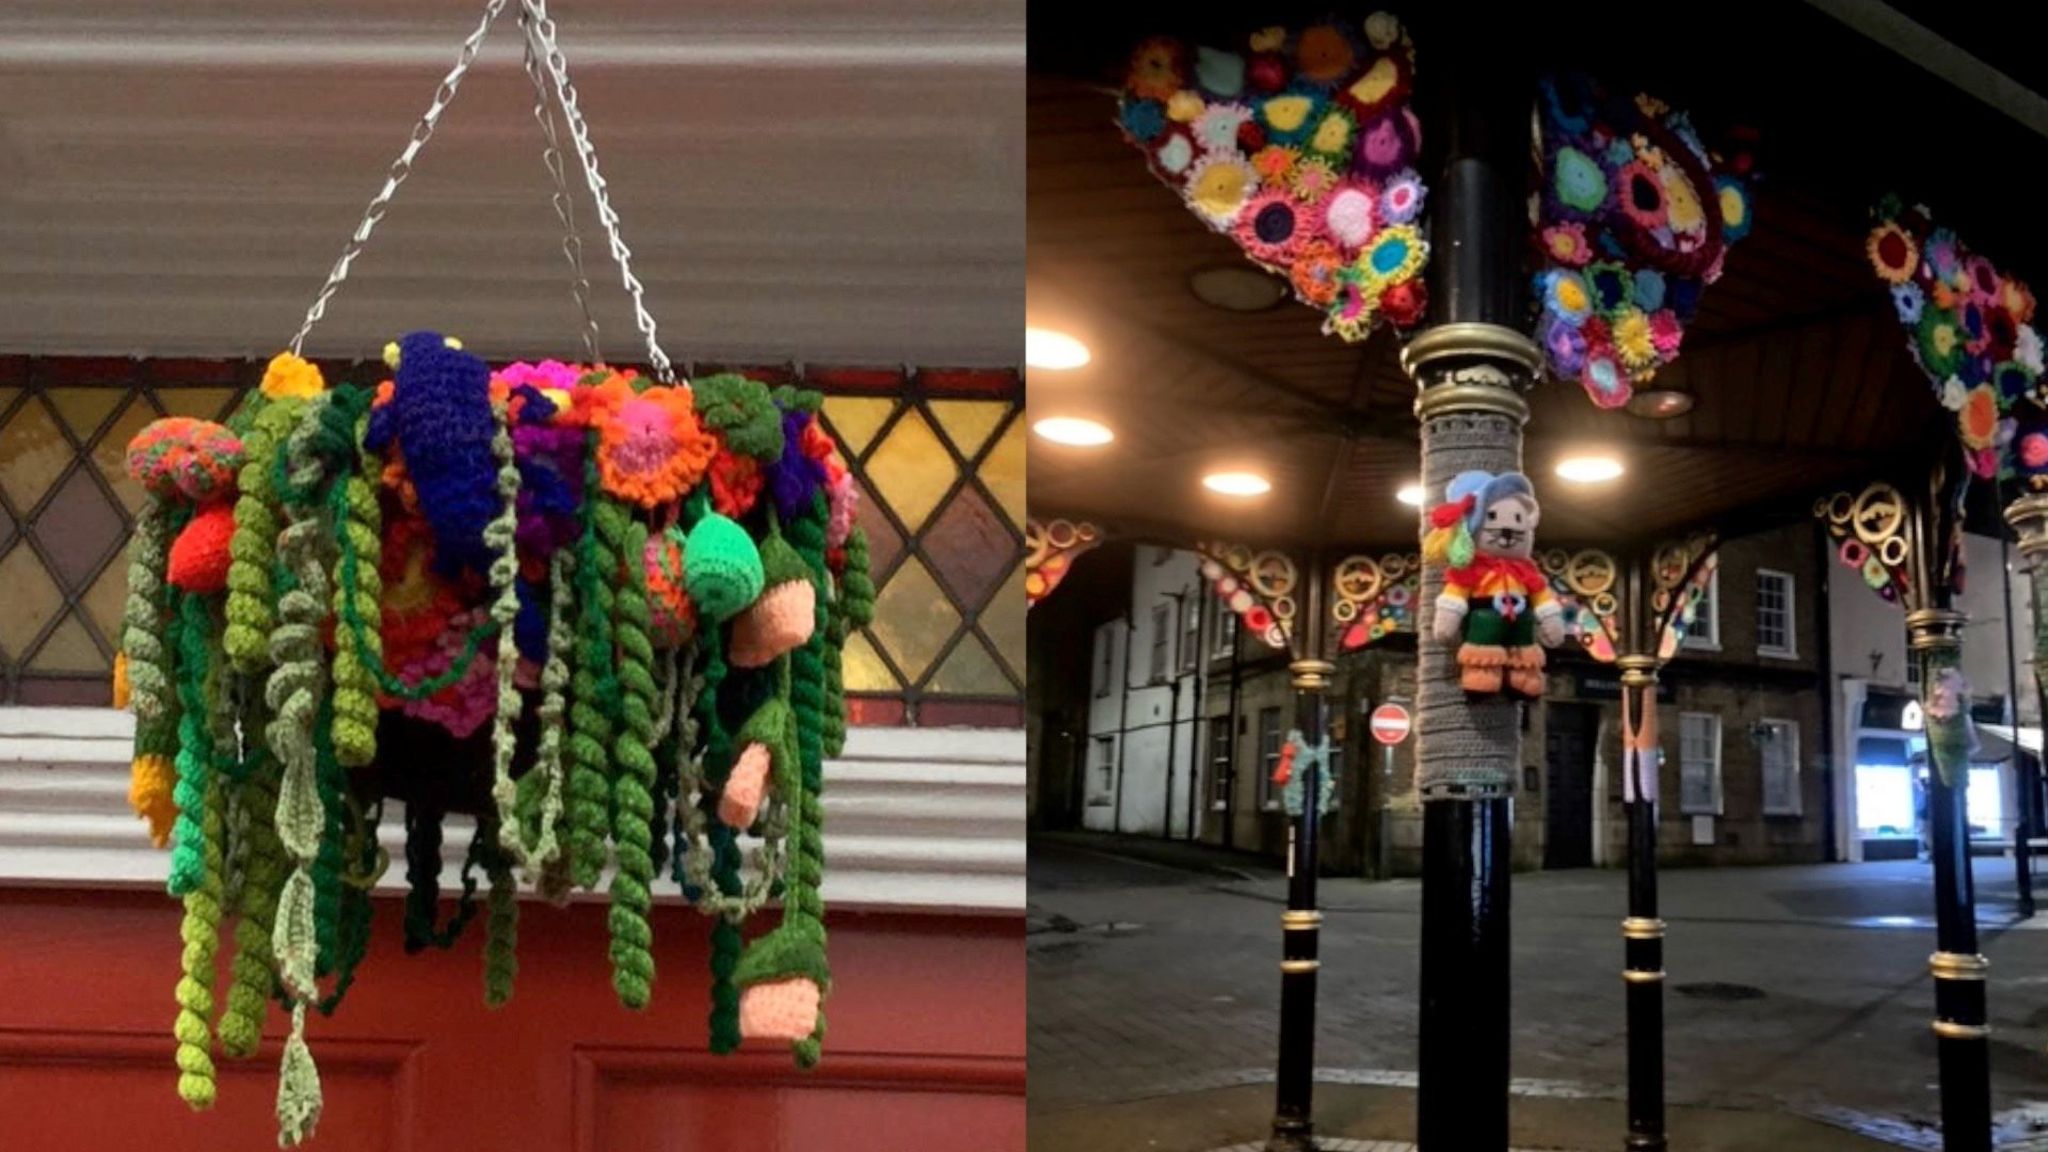 Crocheted flower hanging basket and bandstand.